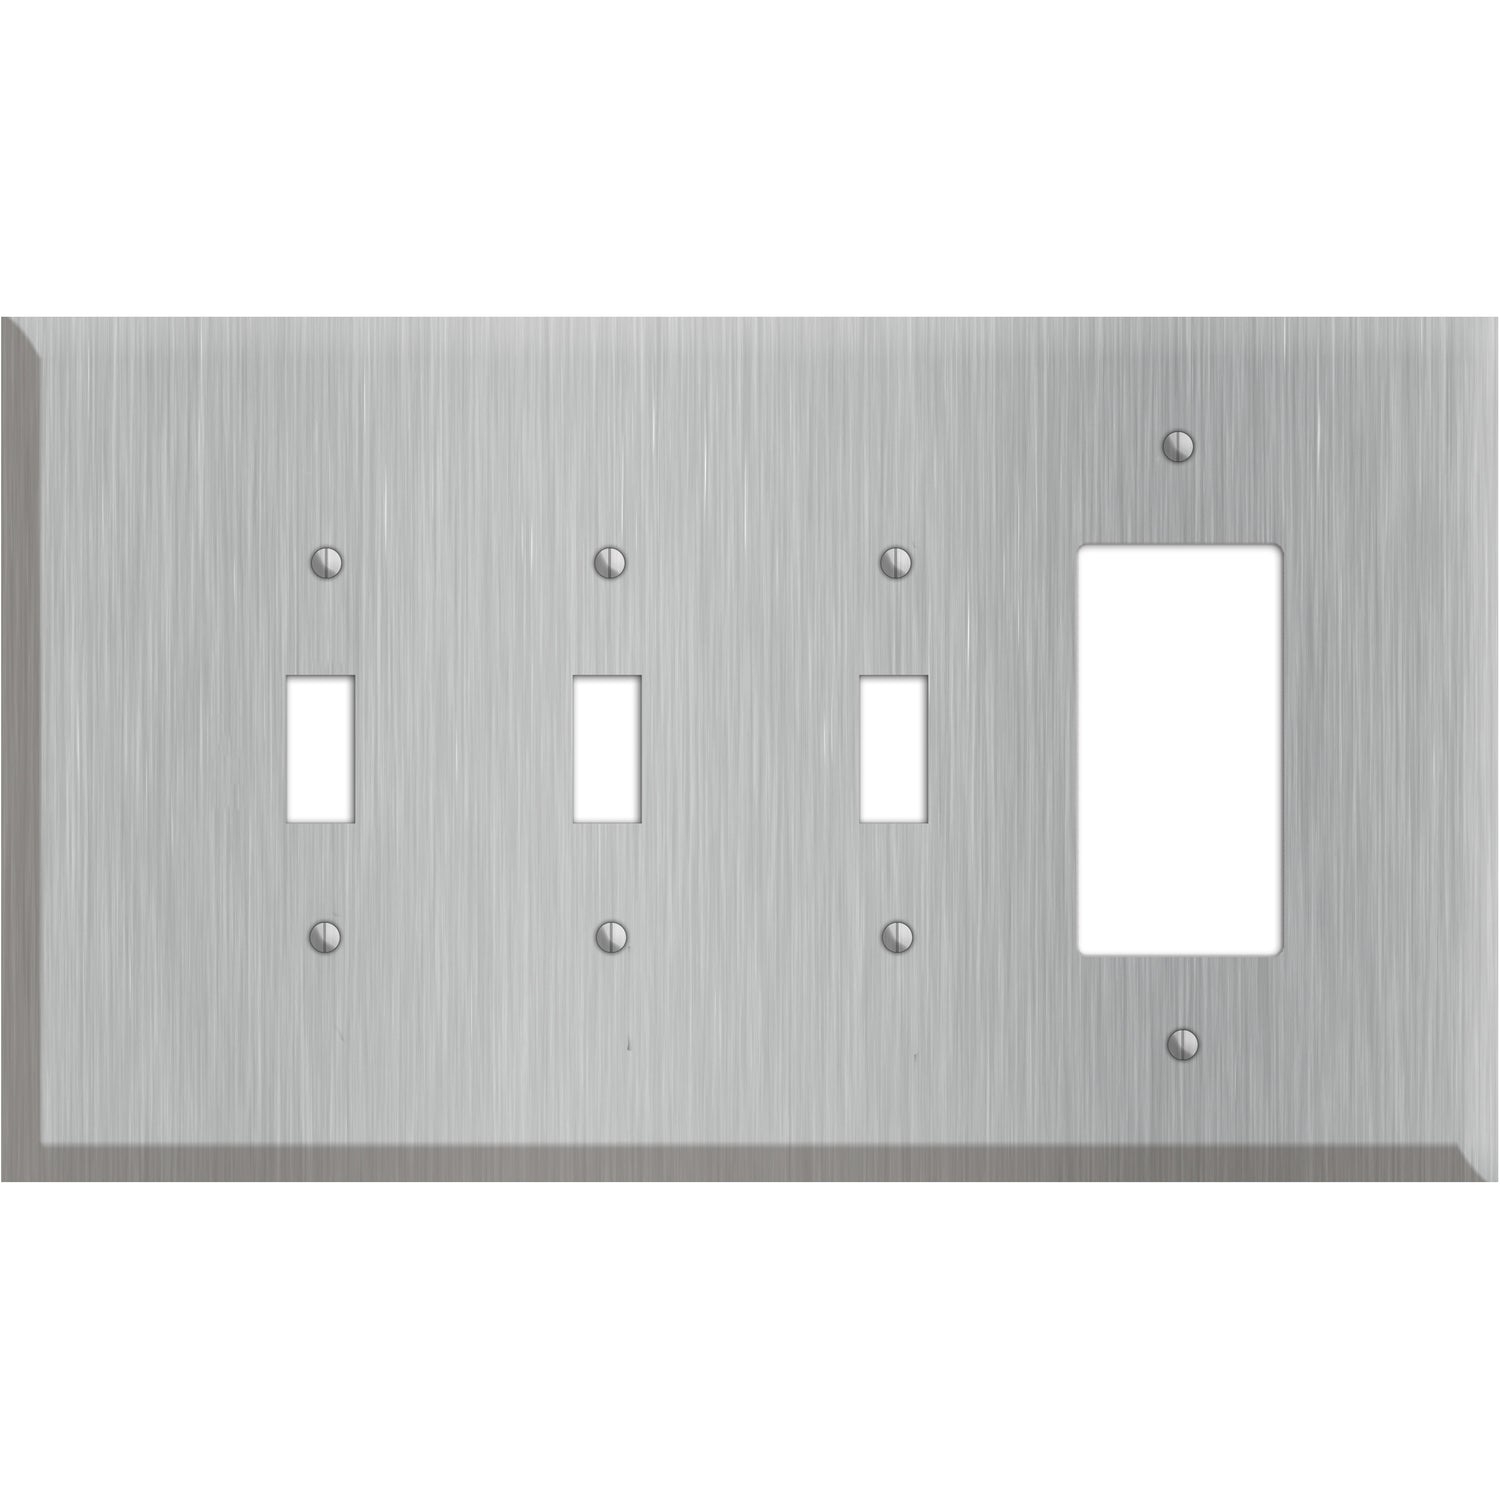 Oversized Discontinued Stainless Steel 3 Toggle / Rocker Wallplate